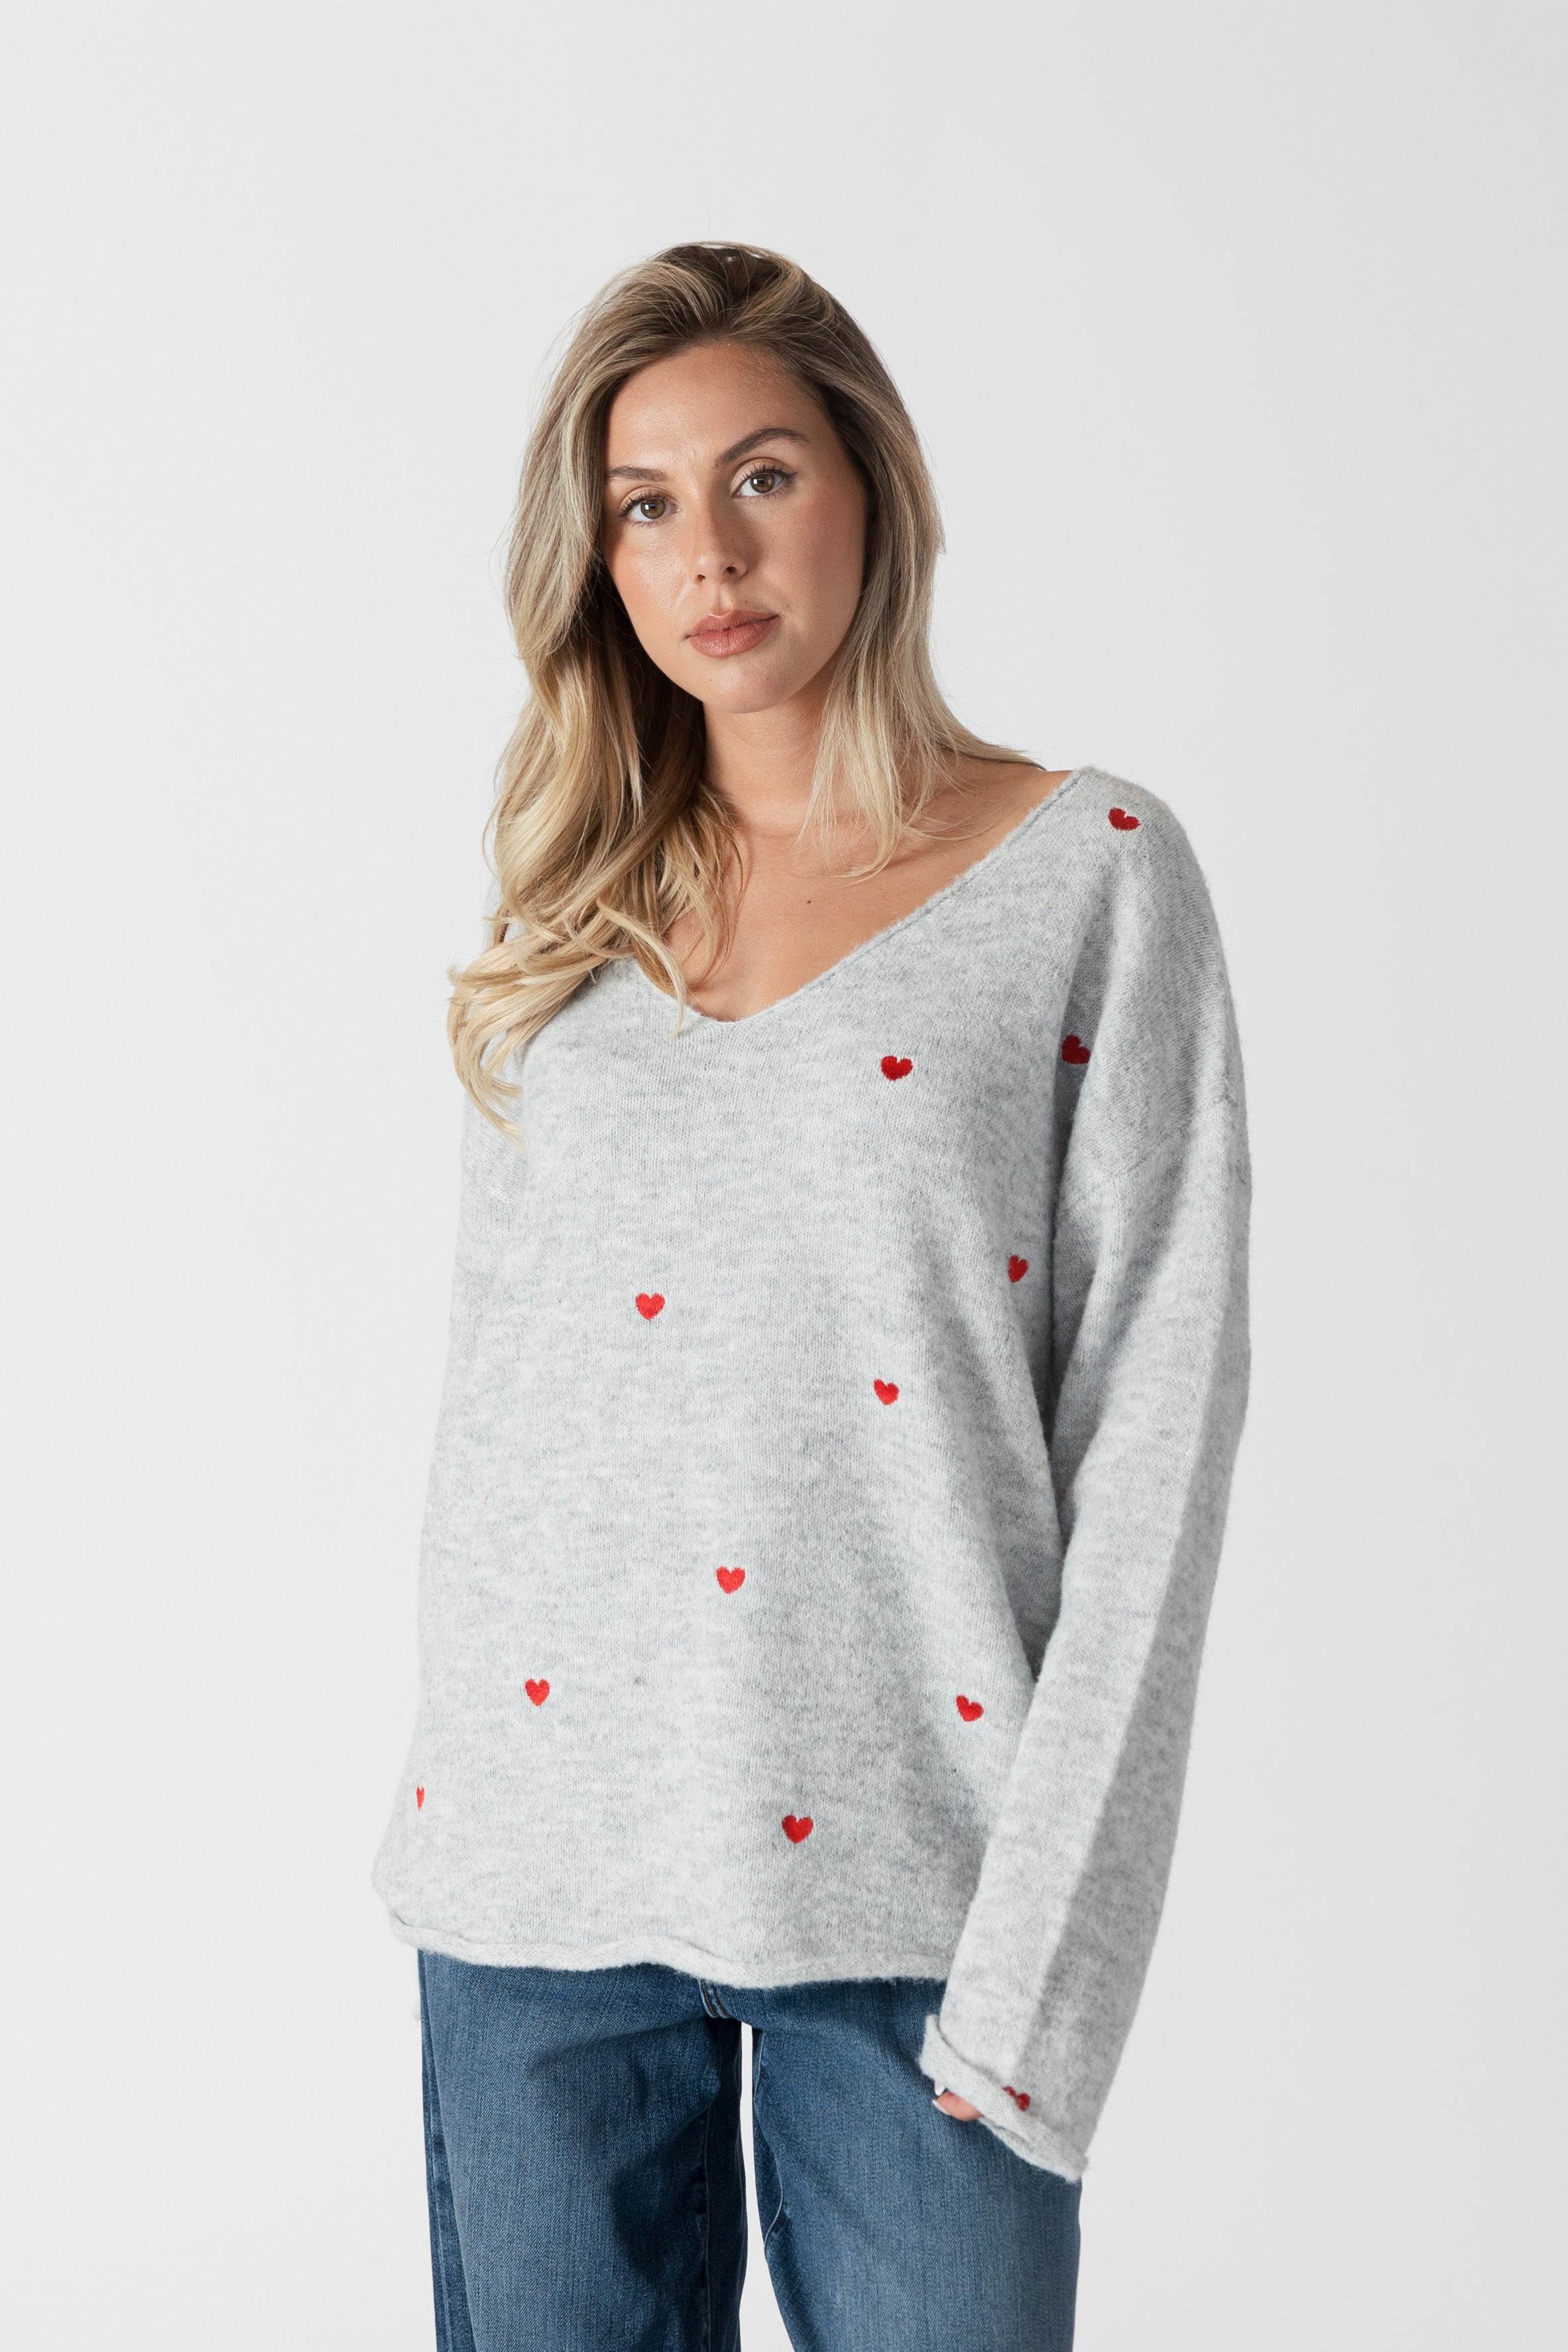 model wearing lyla & luxe luna v-neck embroidered hearts sweater, front view